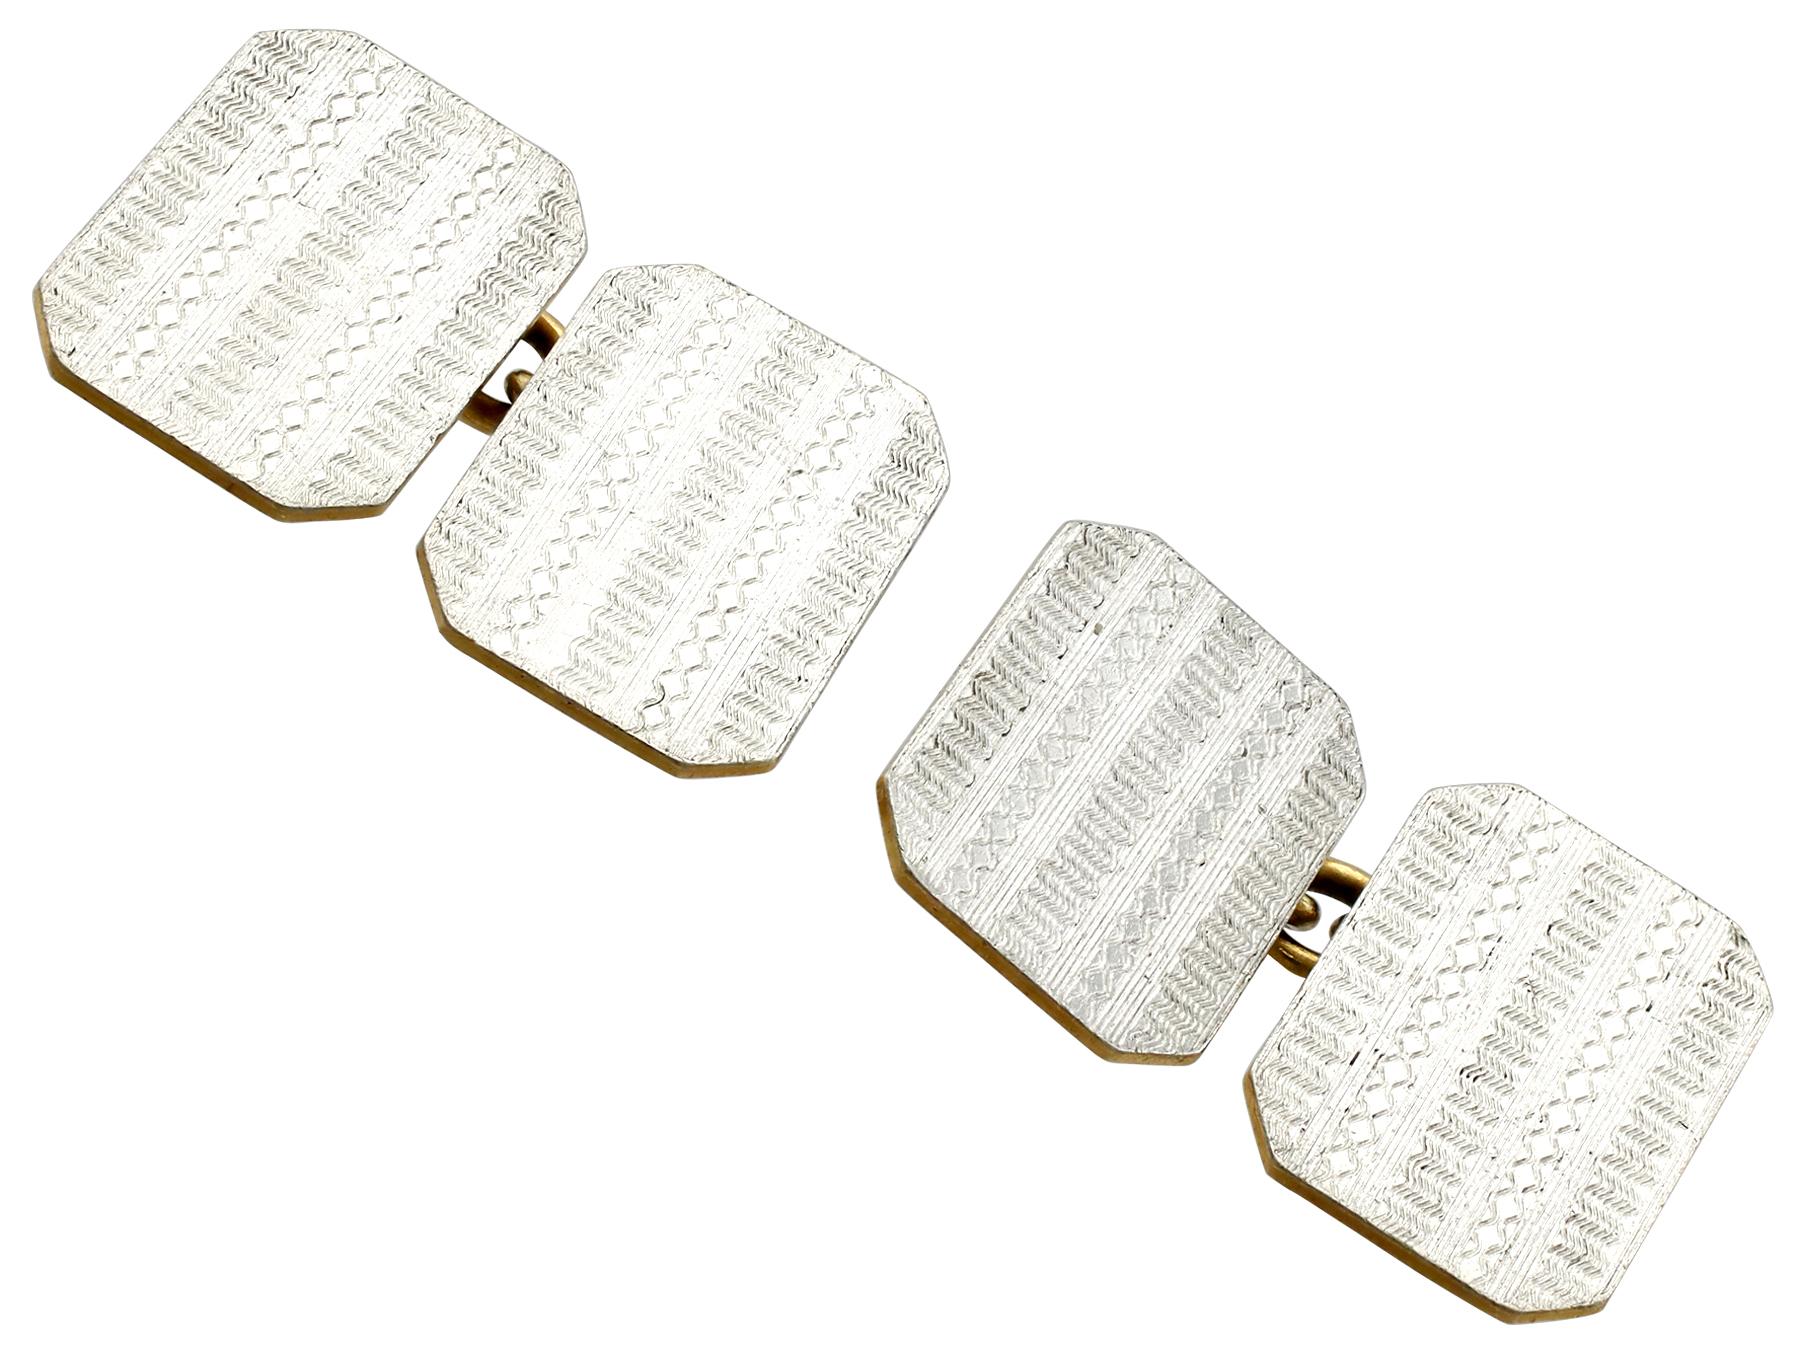 A fine pair of vintage English 18 karat yellow gold and platinum cufflinks; part of our diverse vintage jewelry and estate jewelry collections.

These vintage cufflinks have been crafted in 18k yellow gold and platinum.

The cufflinks have a